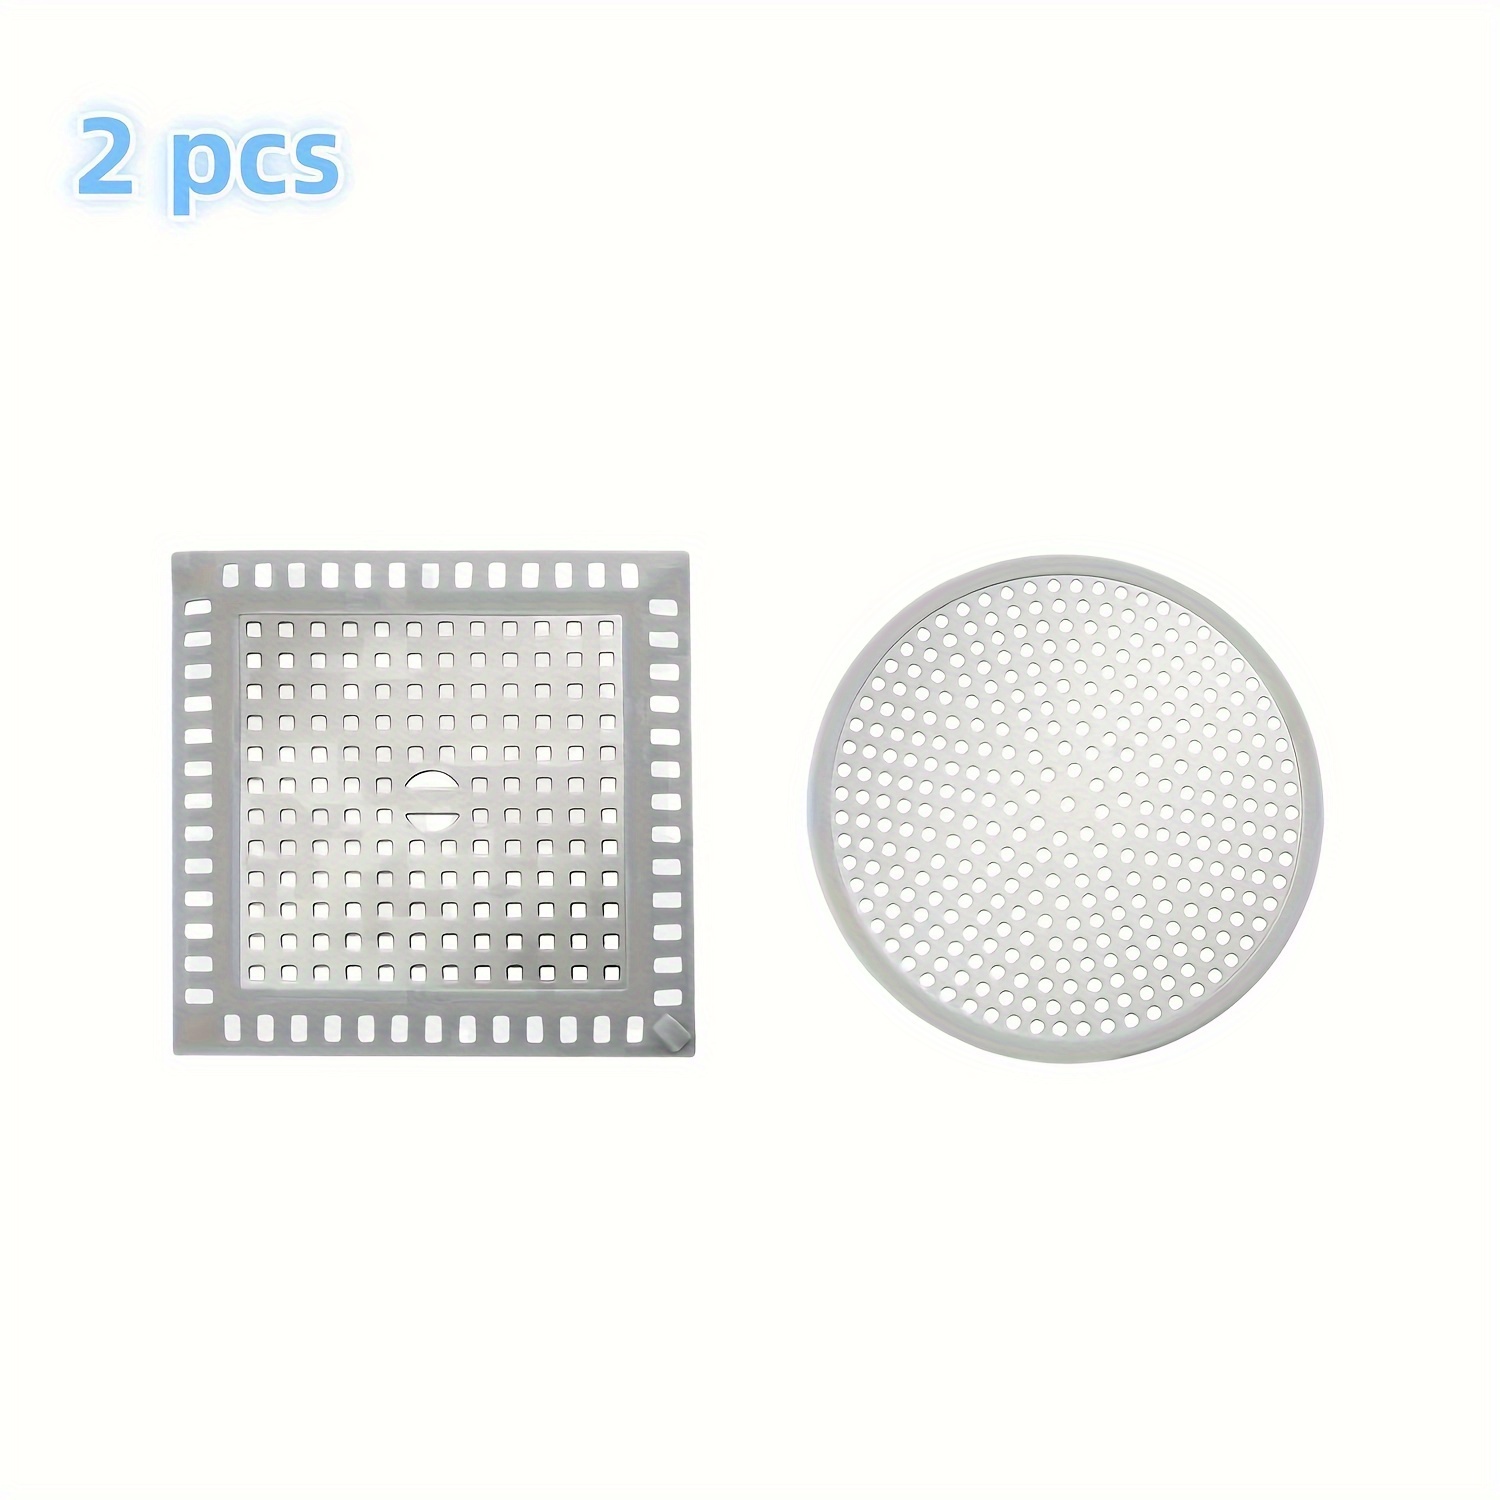 LEKEYE Shower Drain Hair Catcher/Strainer/Stainless Steel and Silicone 